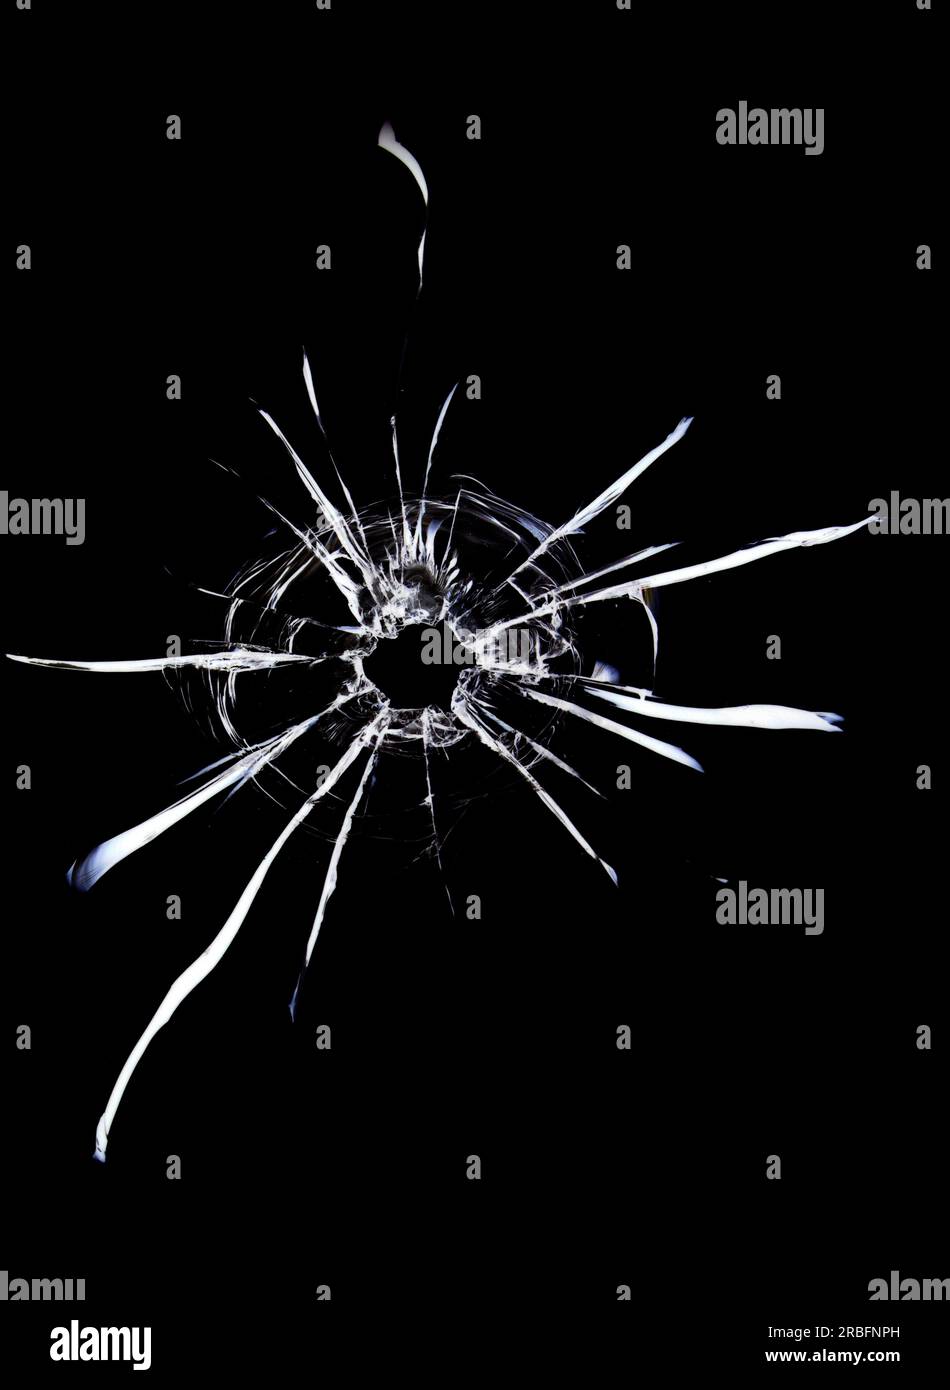 Cracks in the glass on a black background. A bullet hole in a window on a dark background. Stock Photo